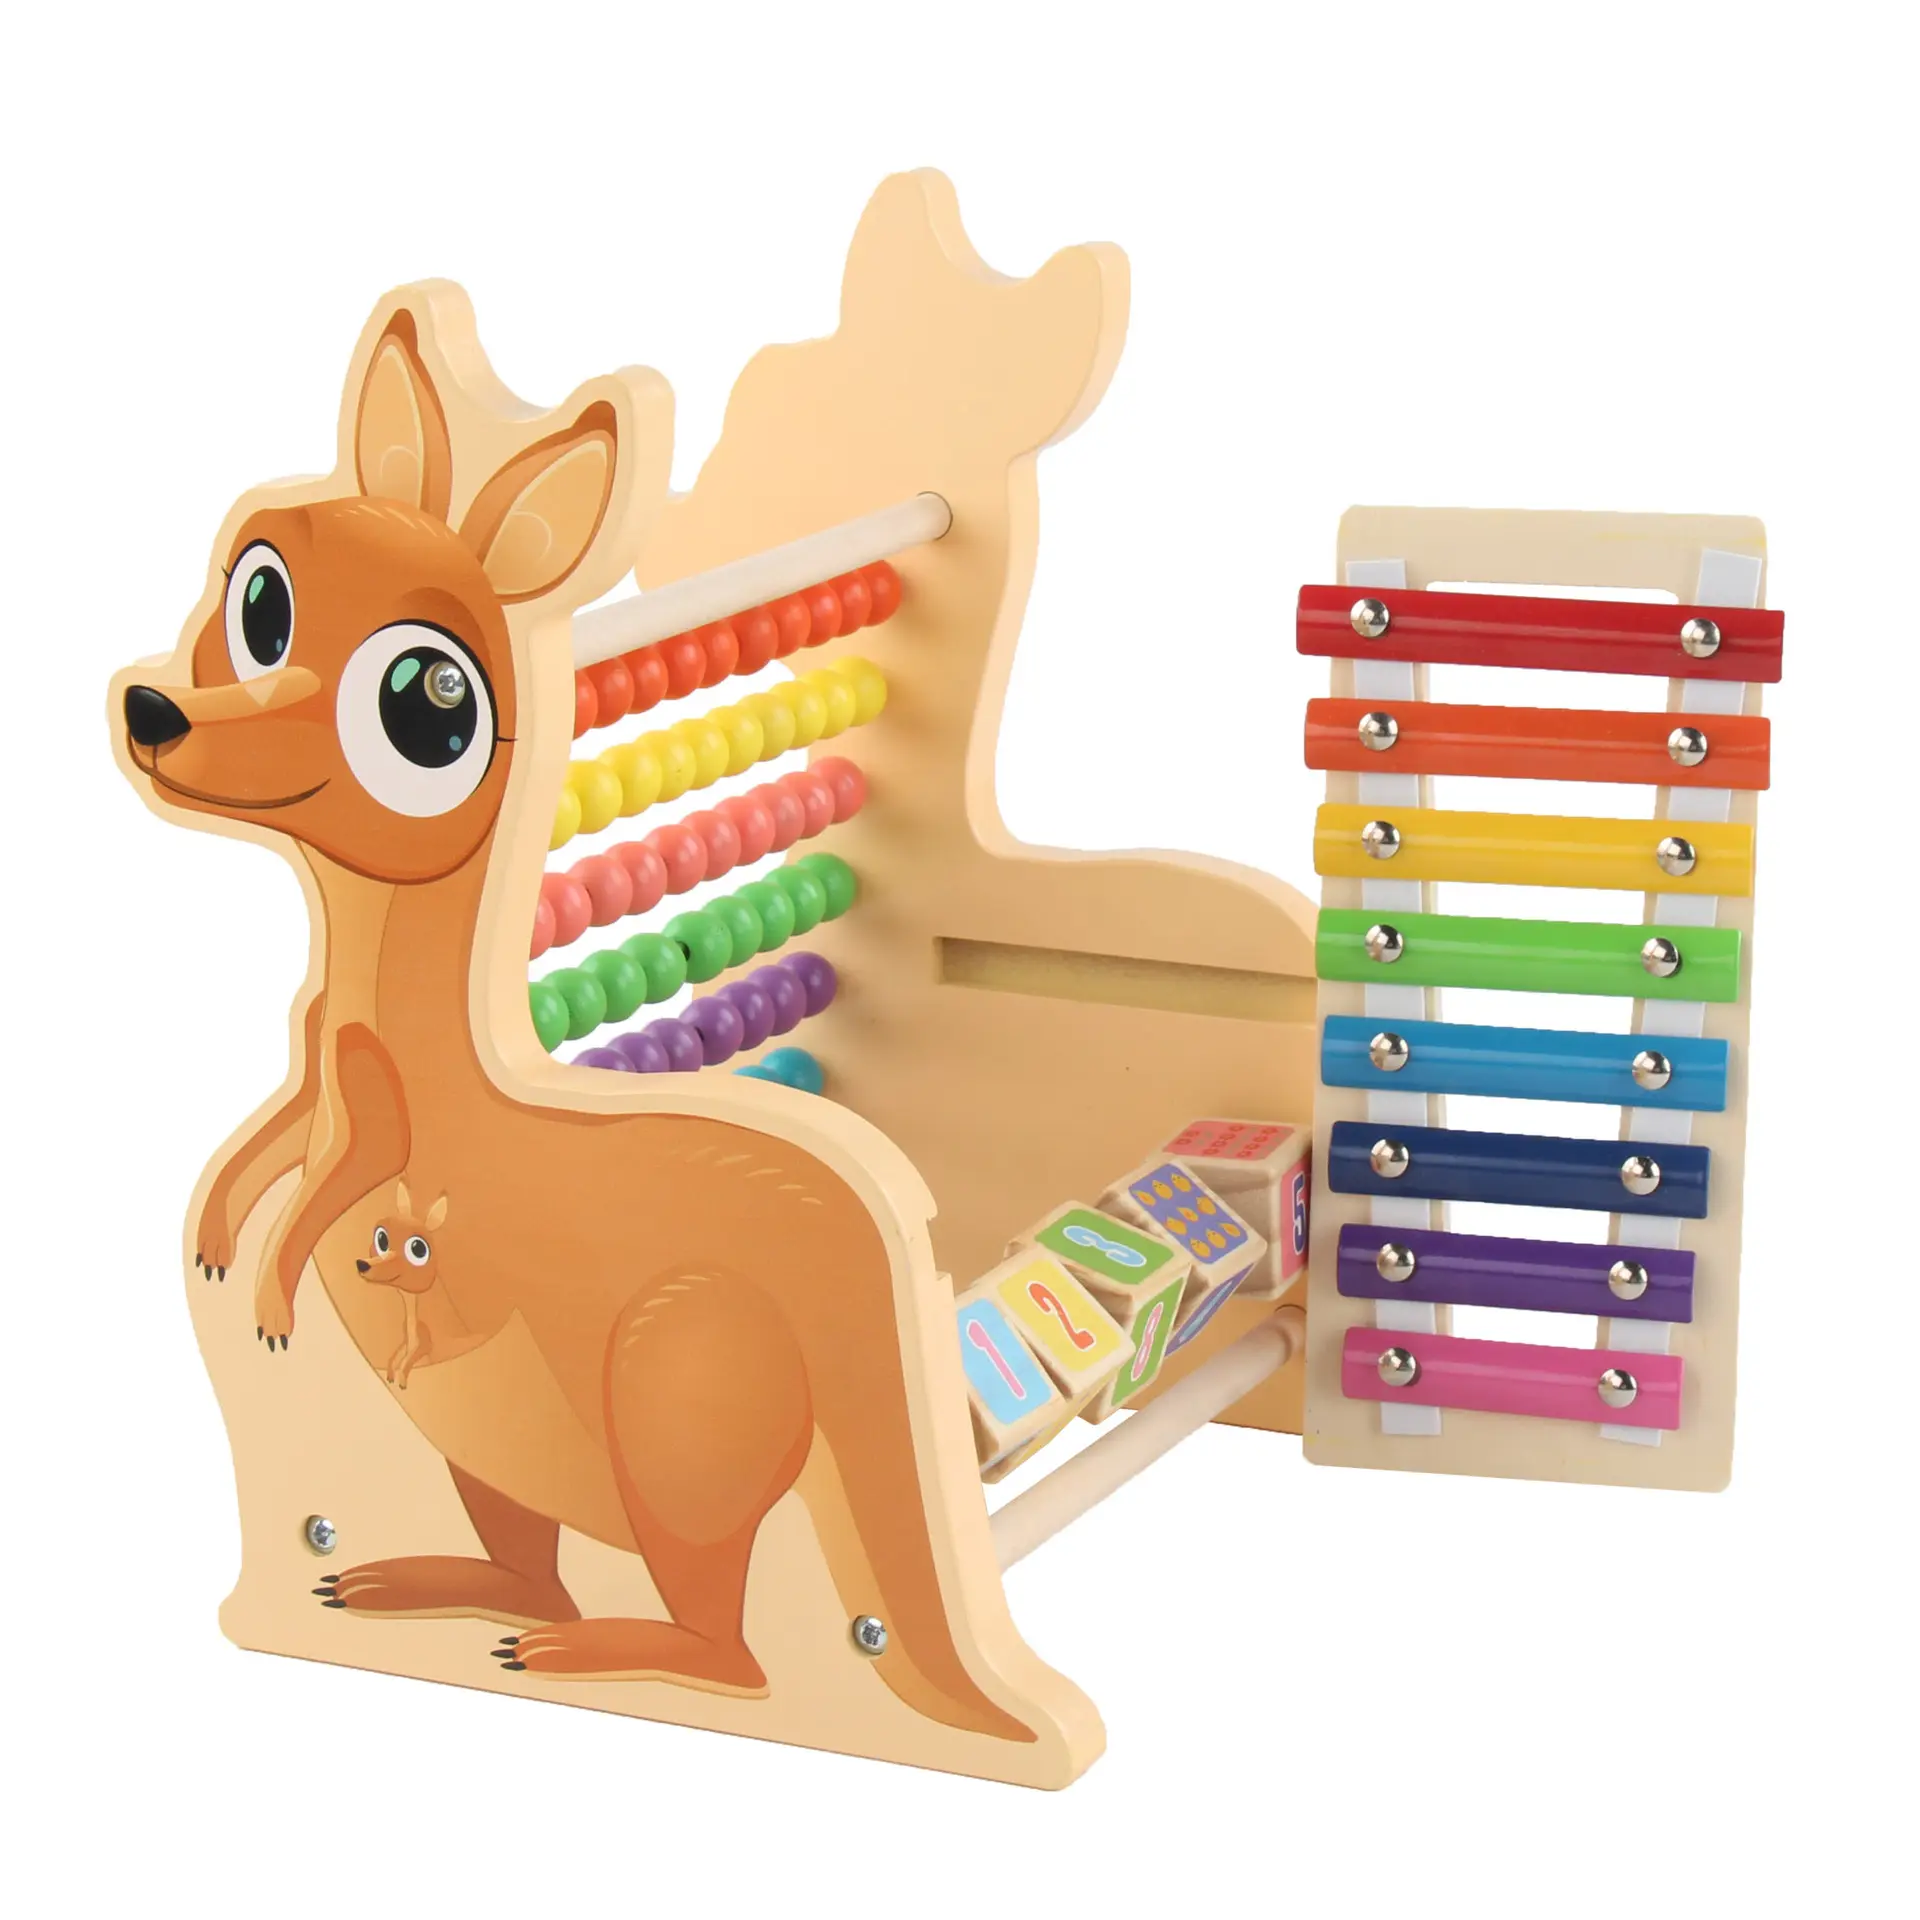 Hot sell Kangaroo Xylophone Calculation Frame Montessori Funny Kids Math Learning Musical Instrument Educational Toys For kids